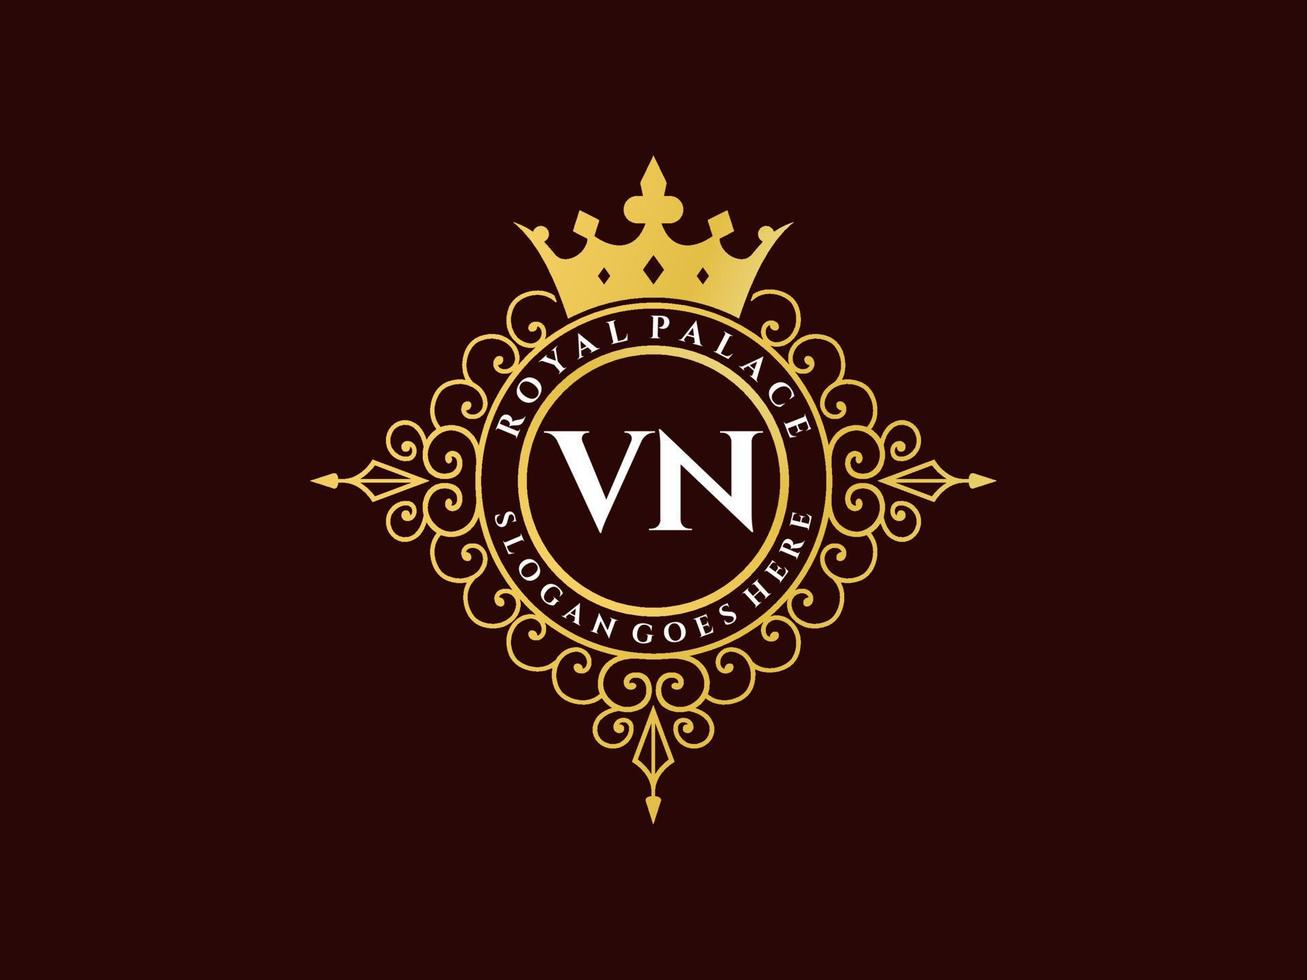 Letter VN Antique royal luxury victorian logo with ornamental frame. vector